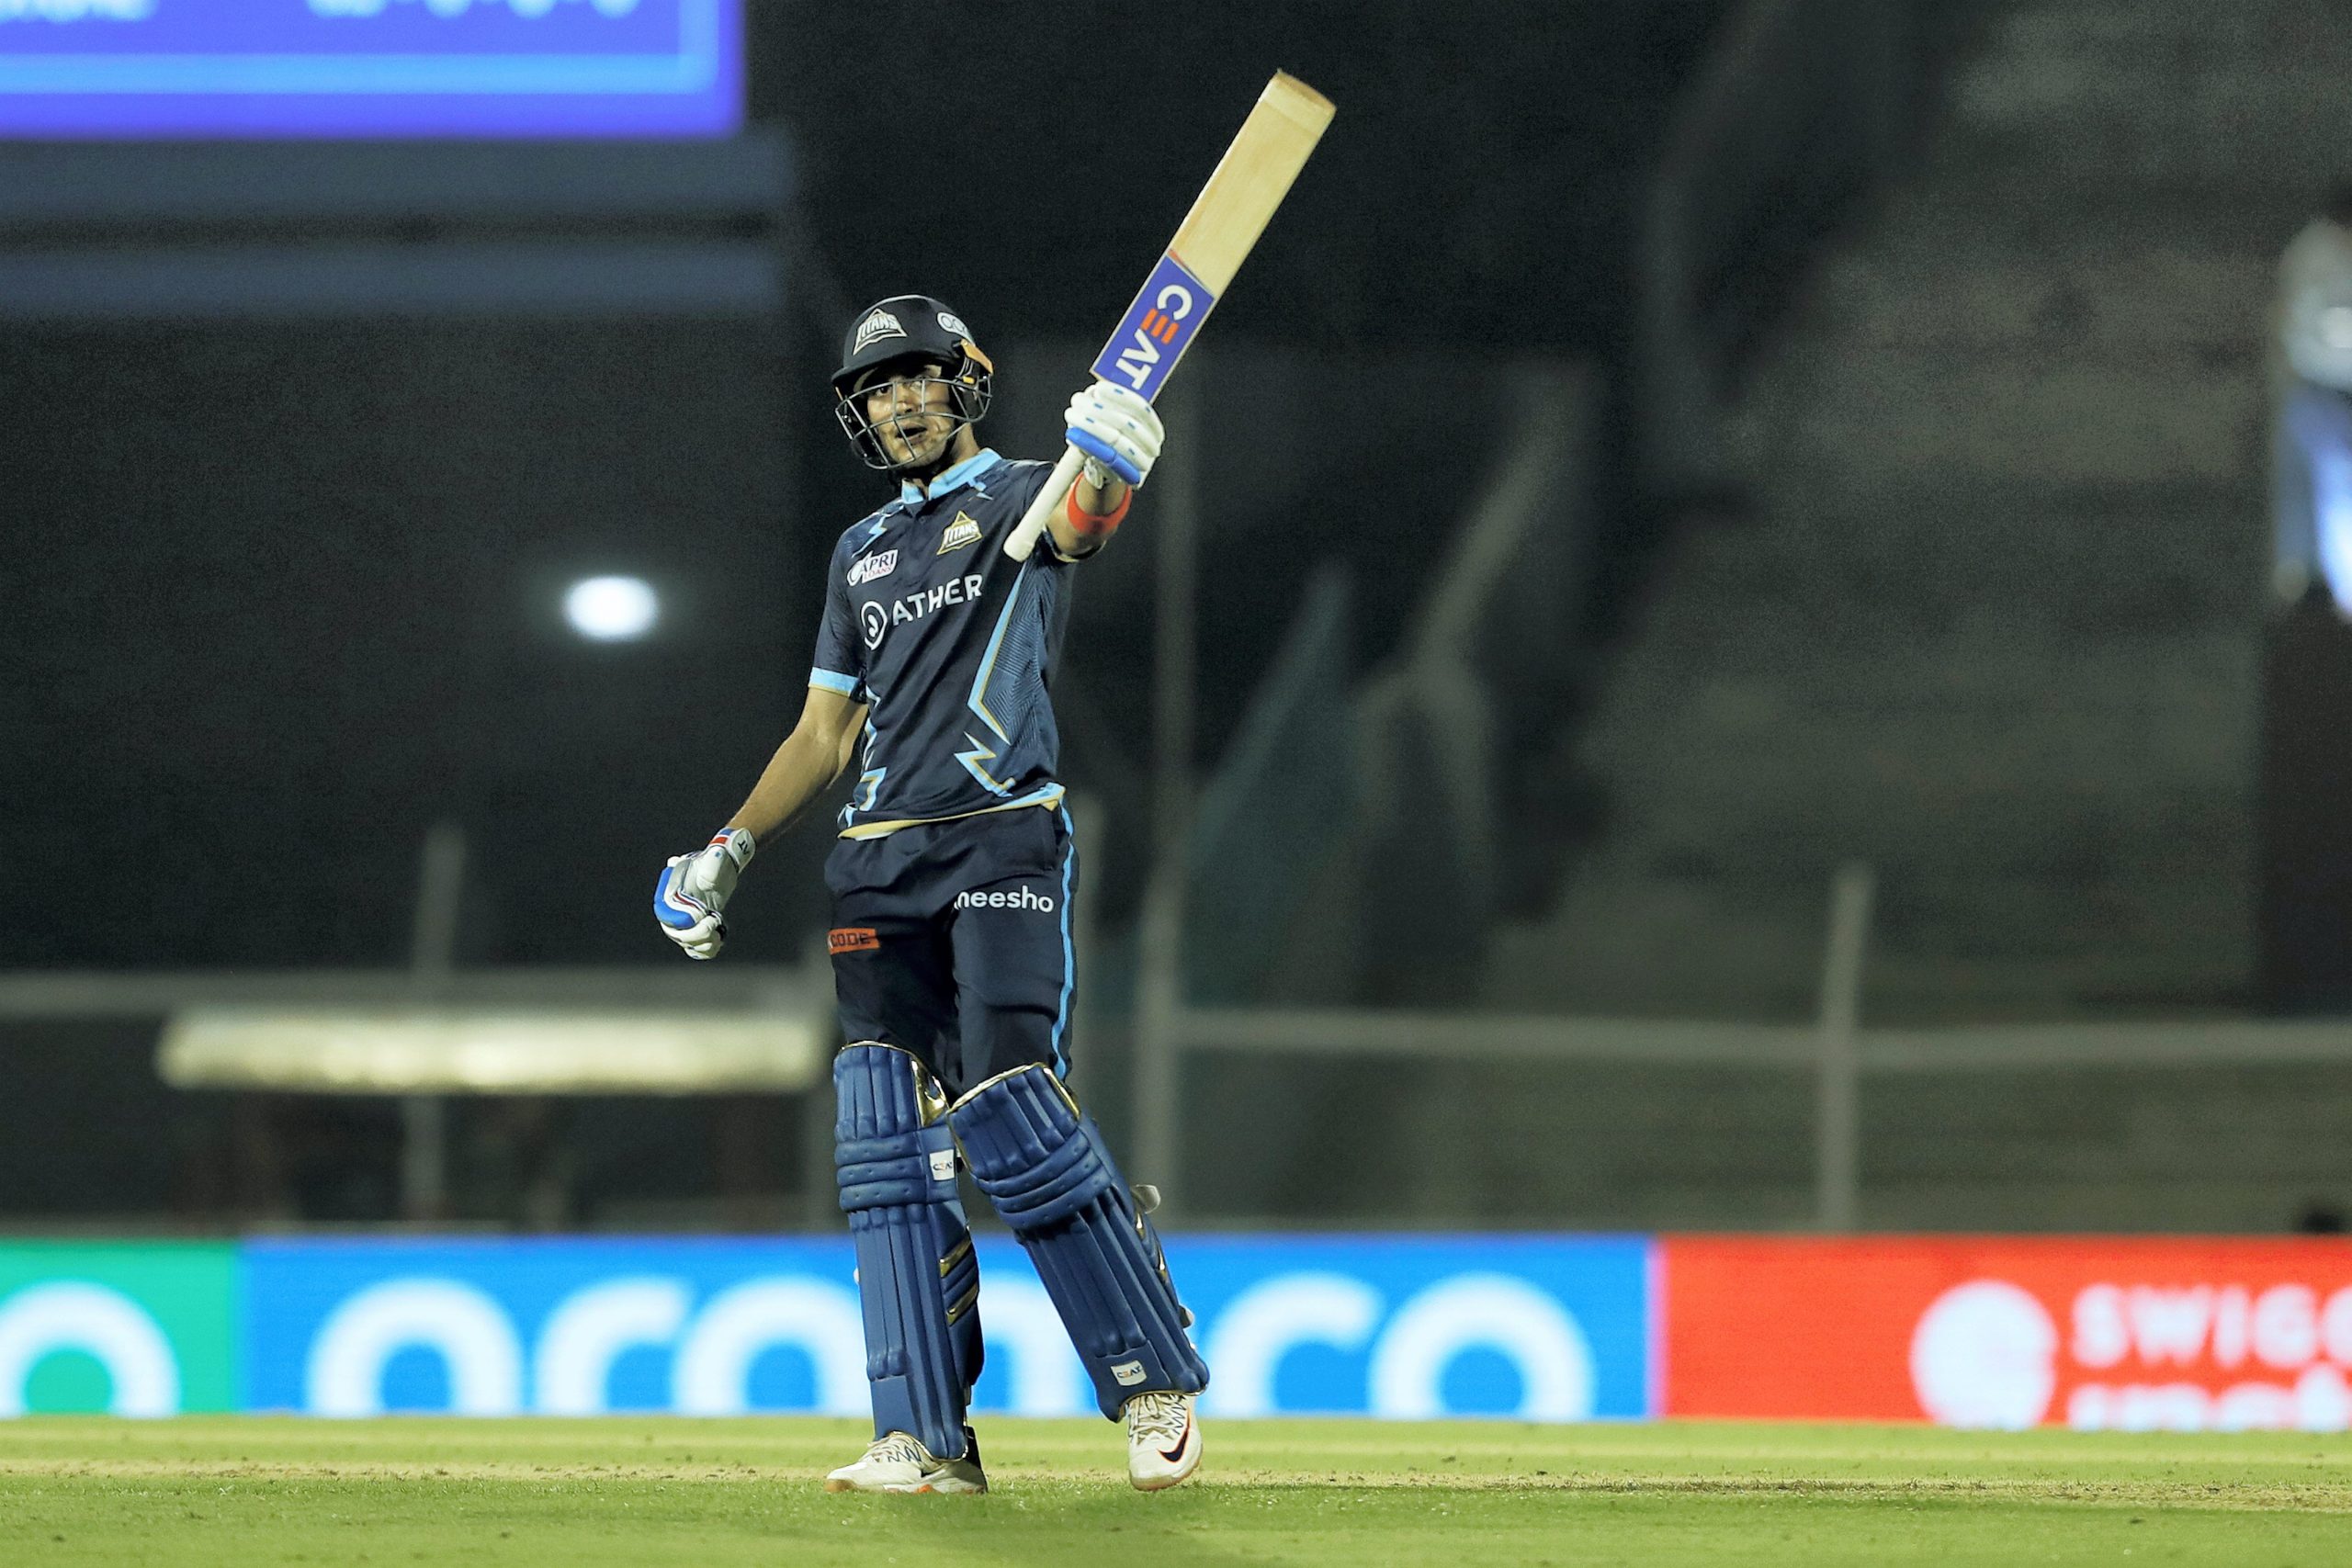 IPL 2022: Gujarat beat Punjab in last-ball thriller, Gill misses out on ton